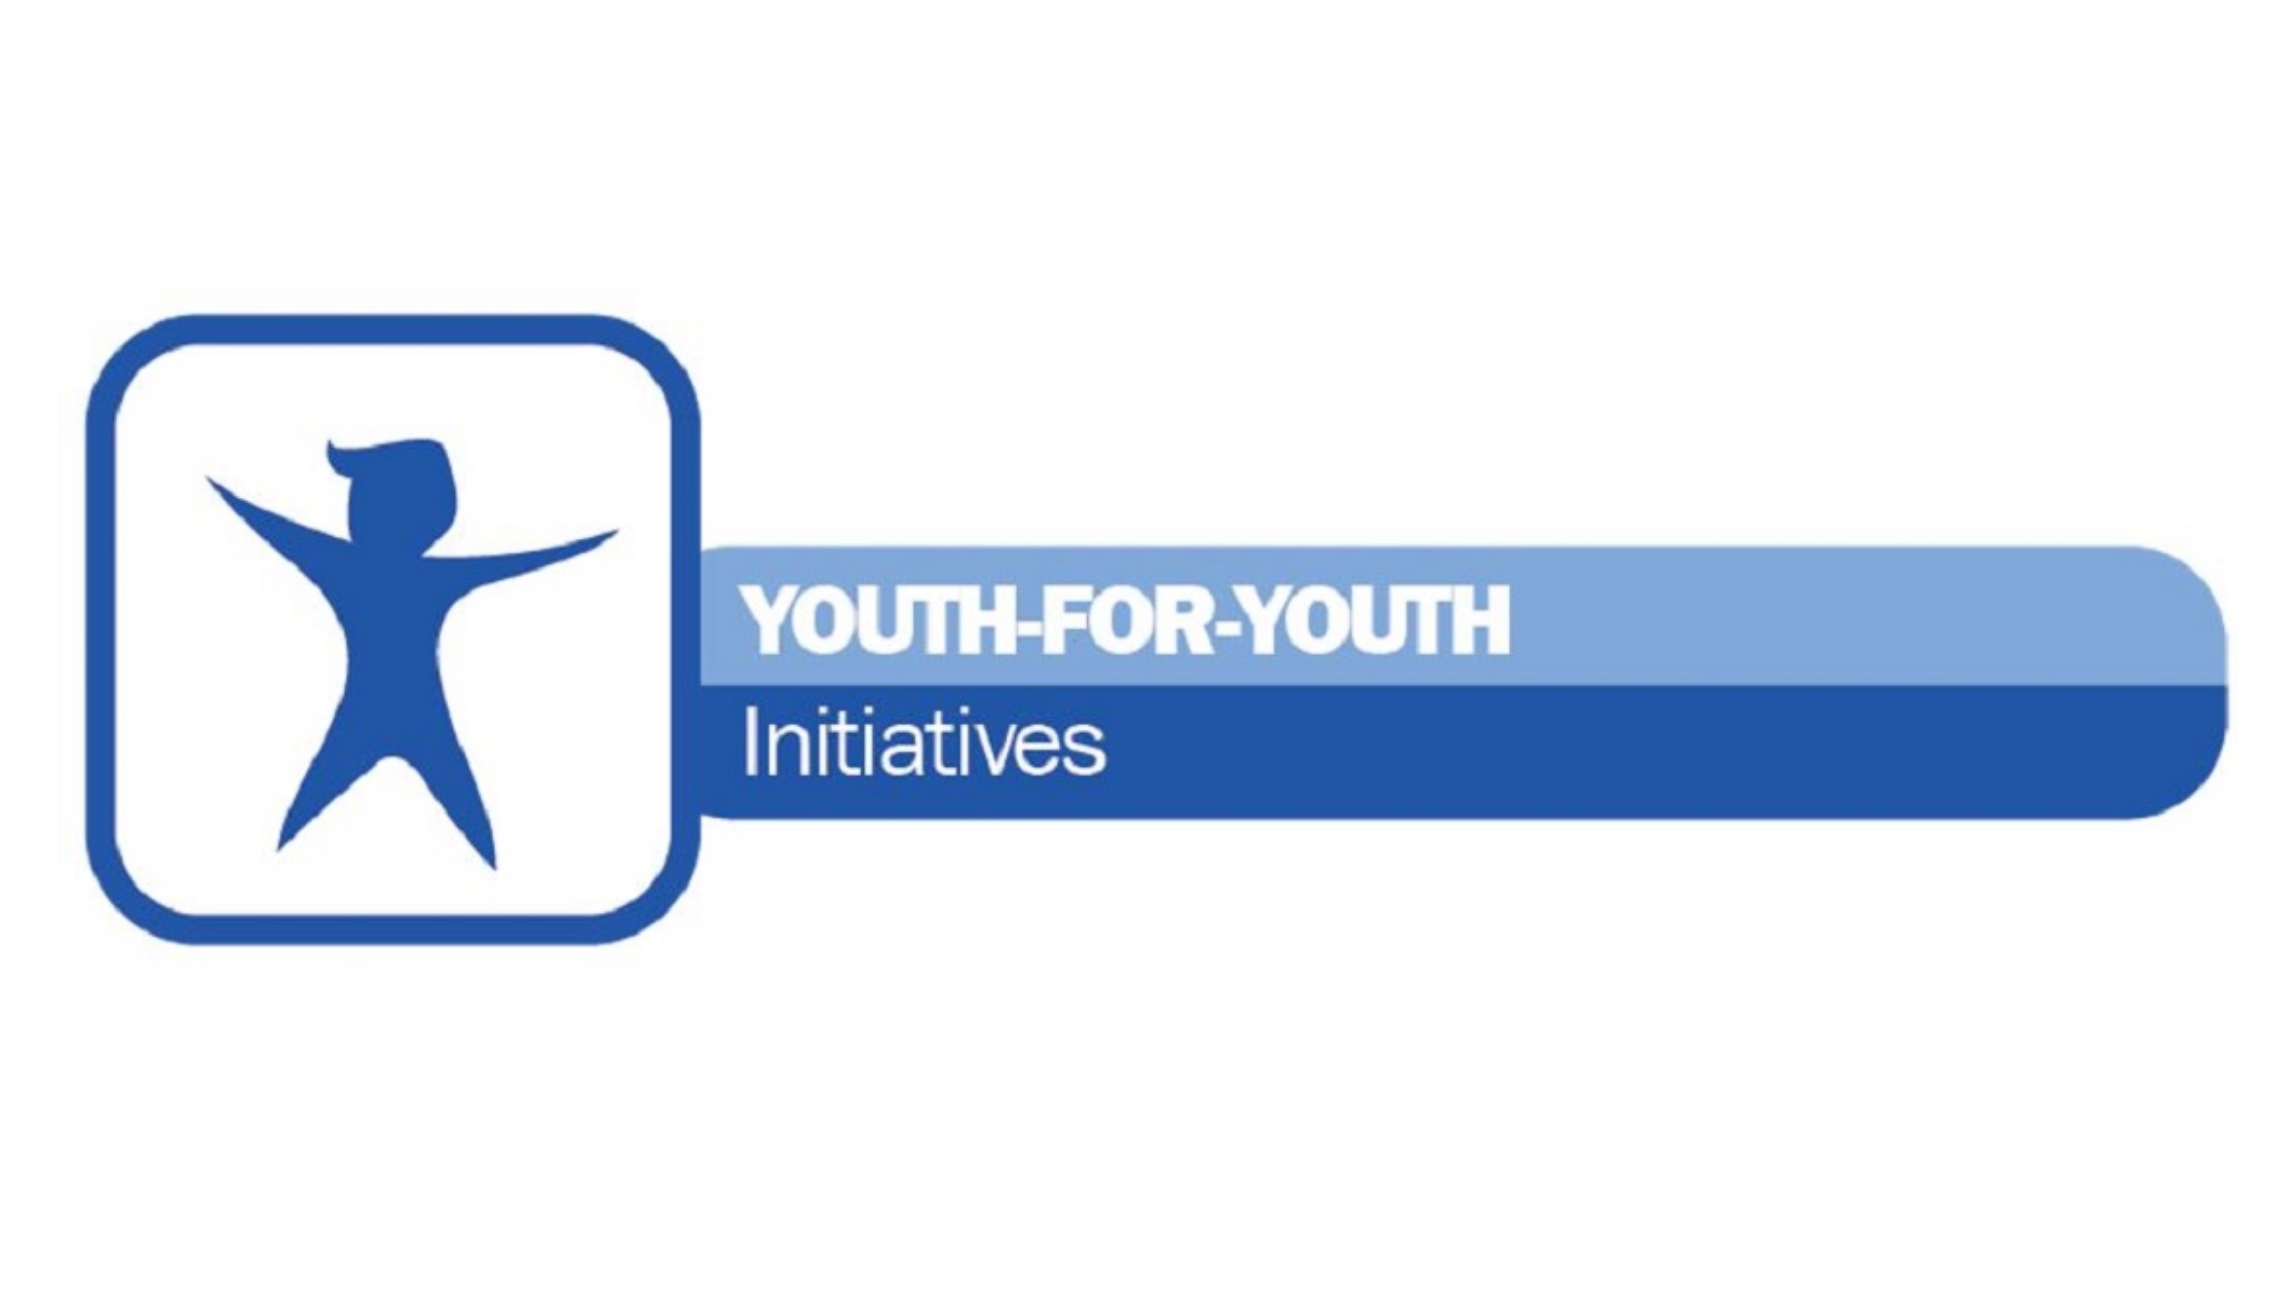 Youth-for-Youth Initiatives